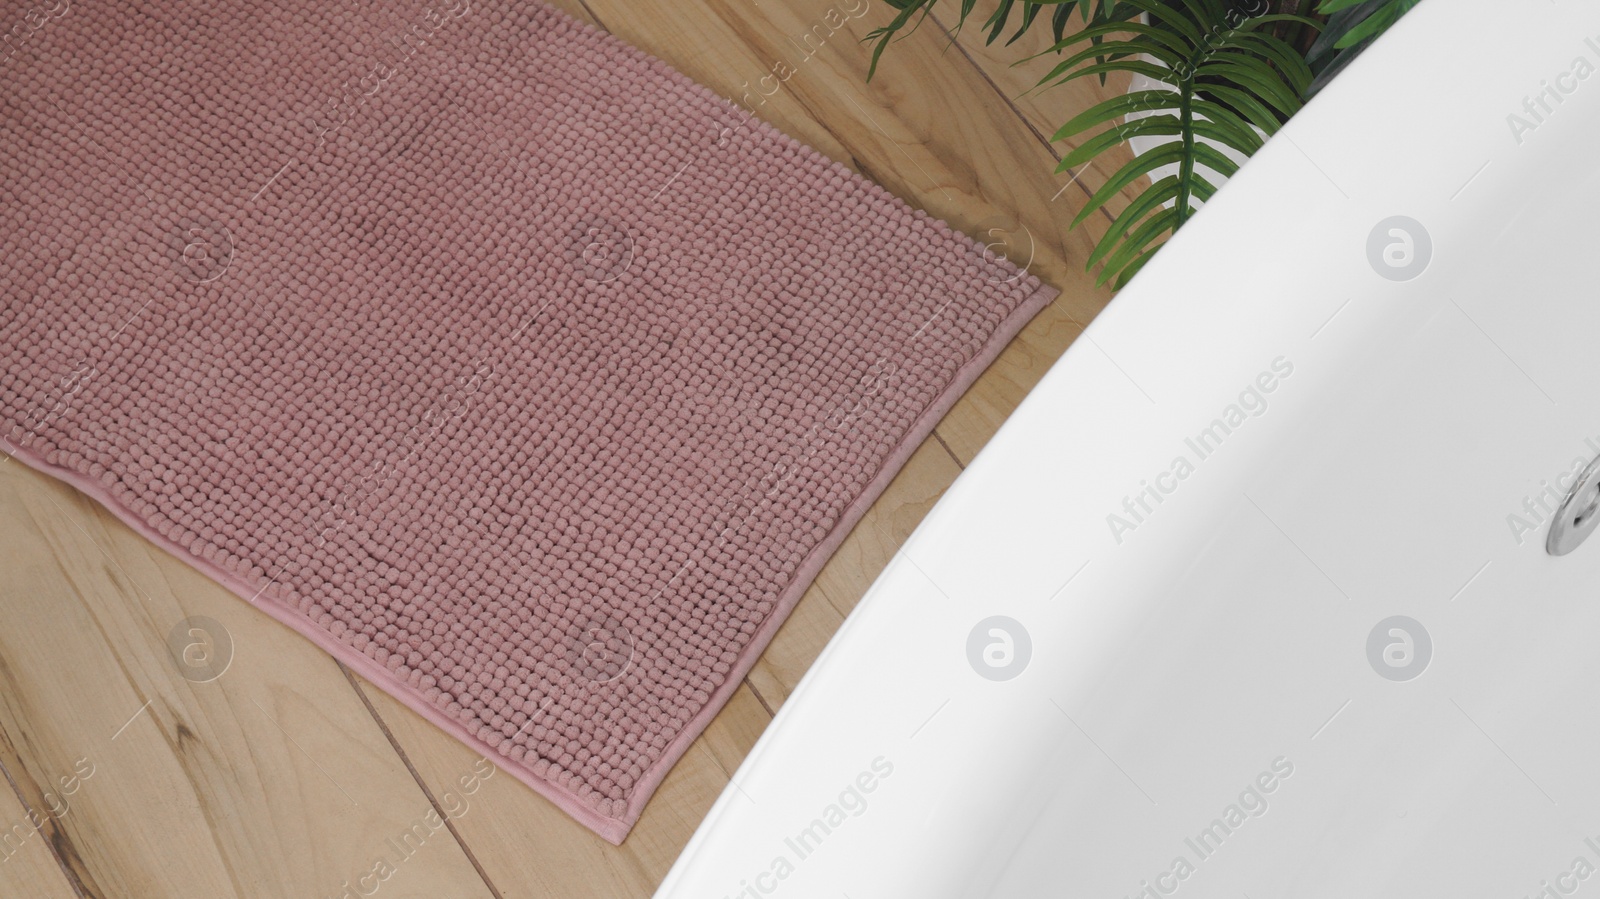 Photo of Pink mat near tub on wooden floor in bathroom, above view